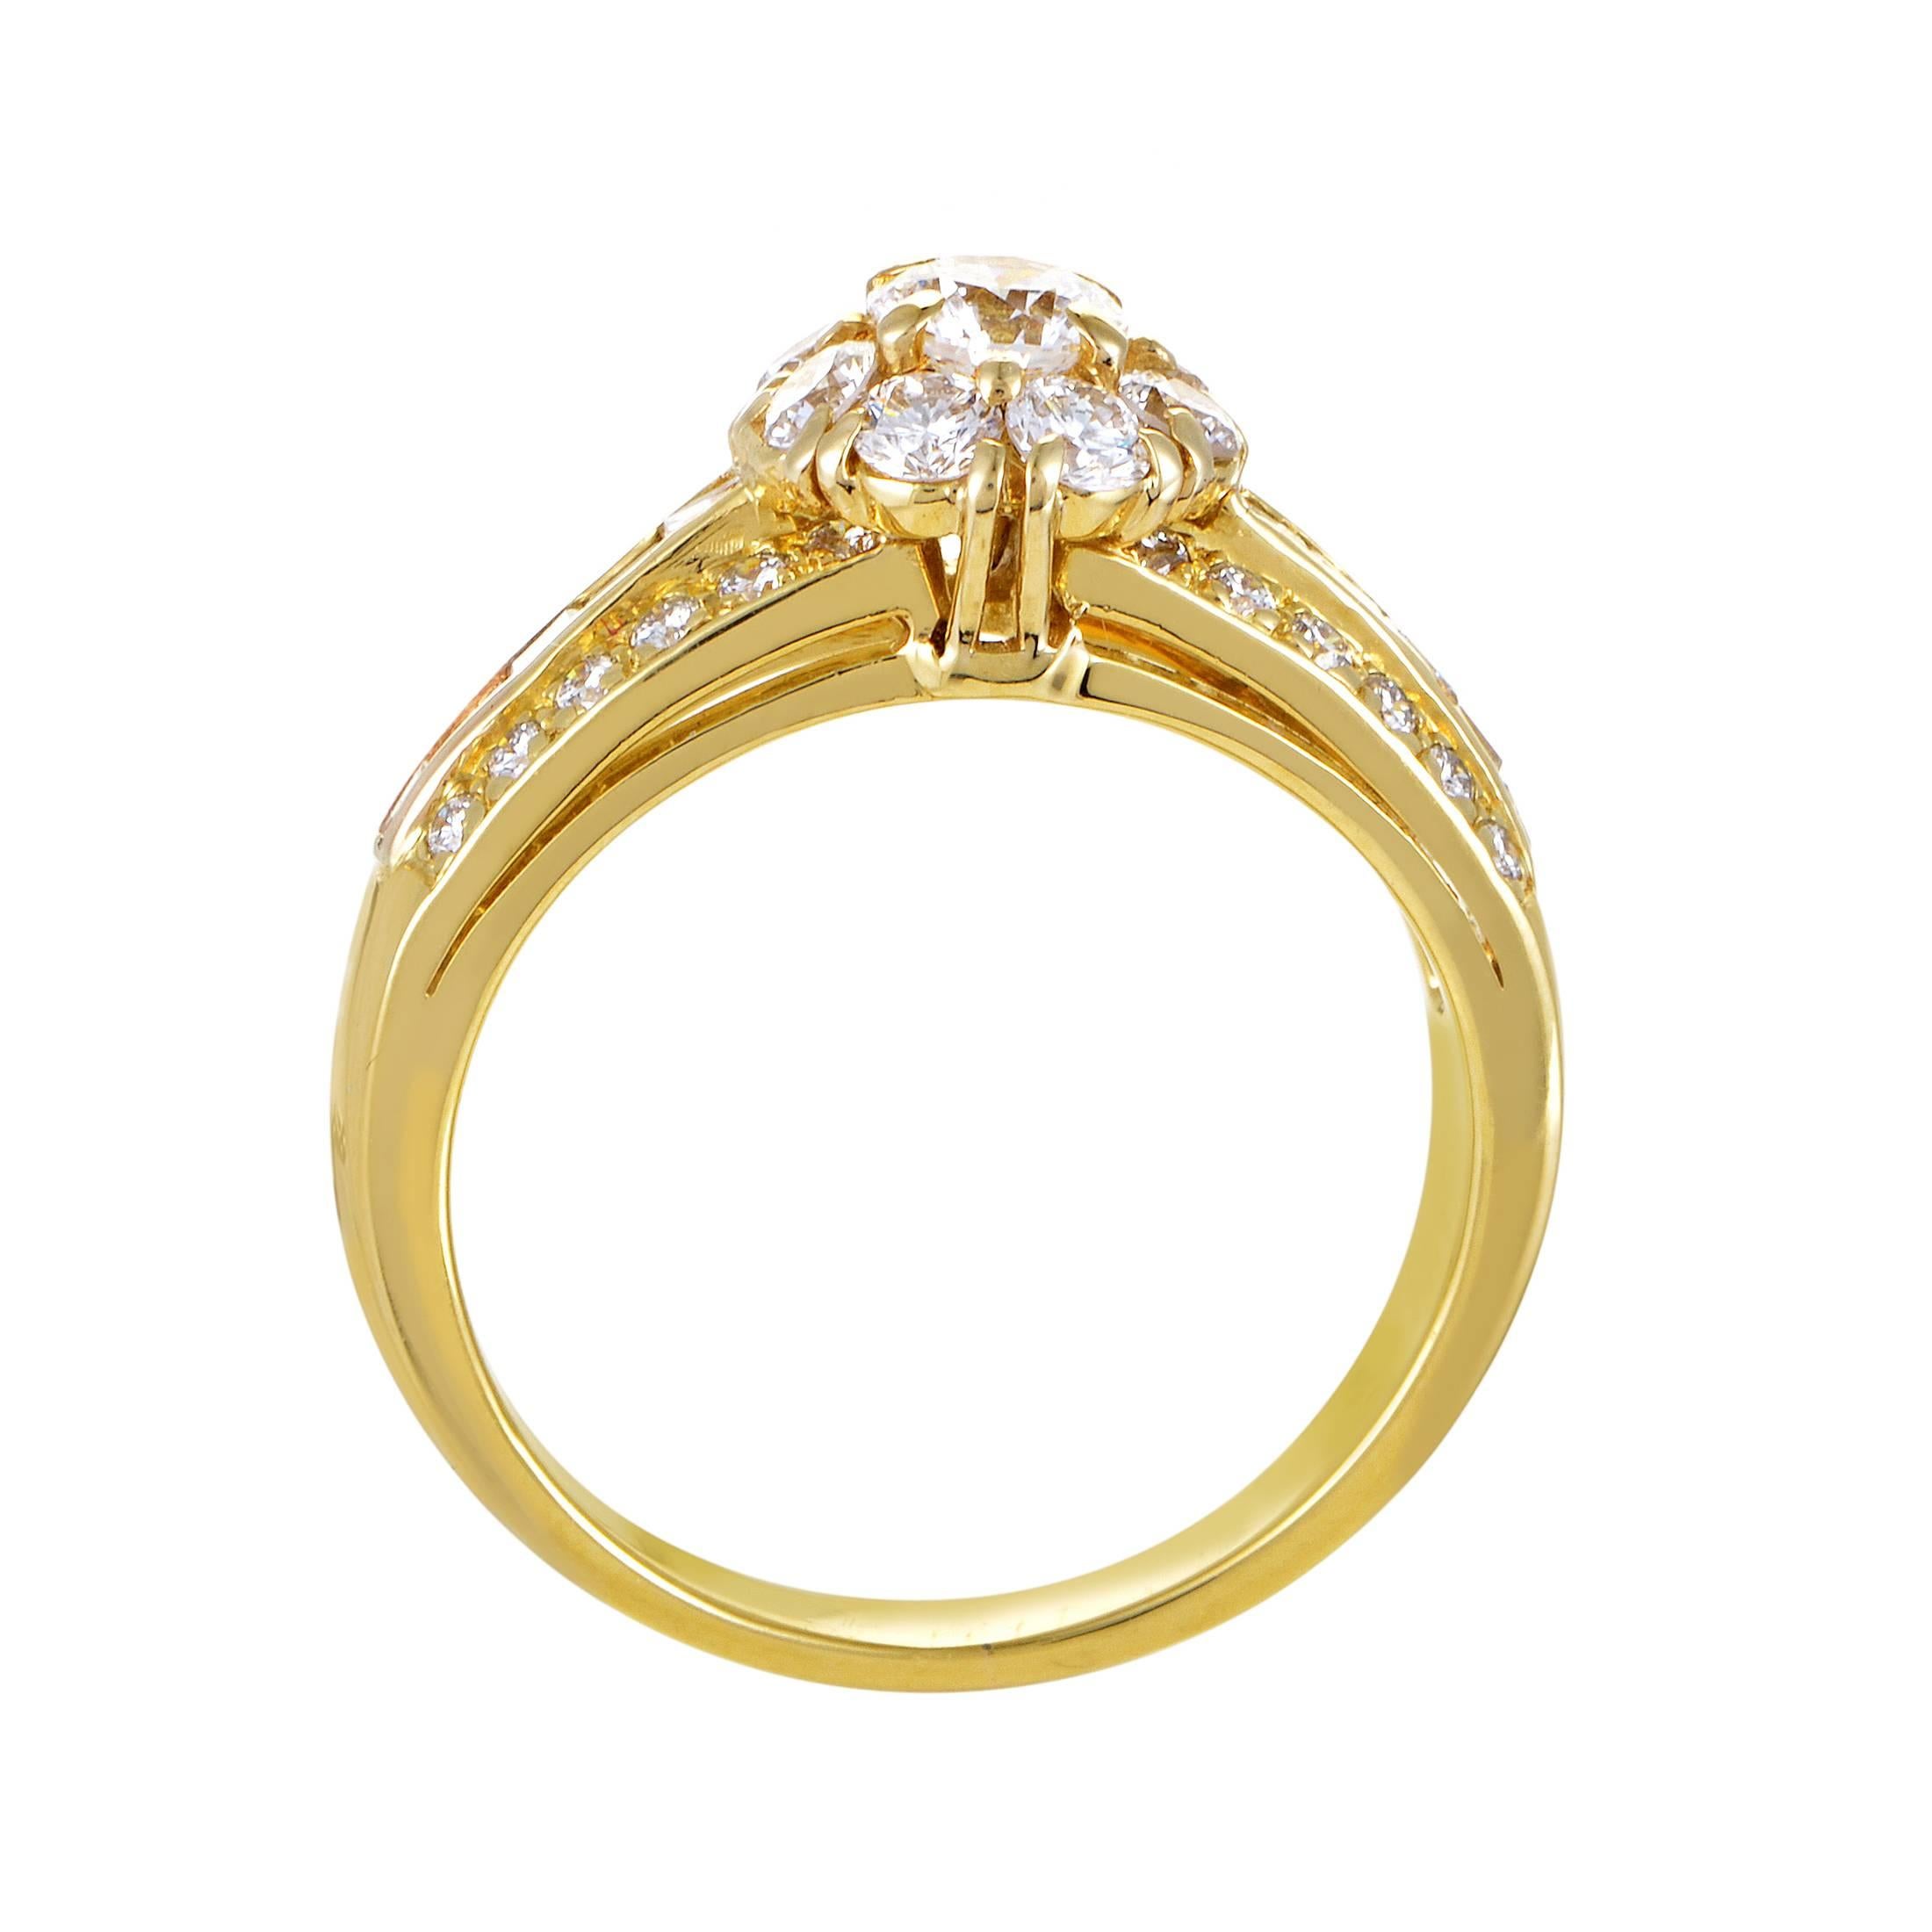 This lovely ring from Van Cleef & Arpels features a classic design that is perfect for any lady. The ring is made of 18K yellow gold and features shanks set with diamonds. as well as a floral-shaped motif comprised of diamonds topping off the